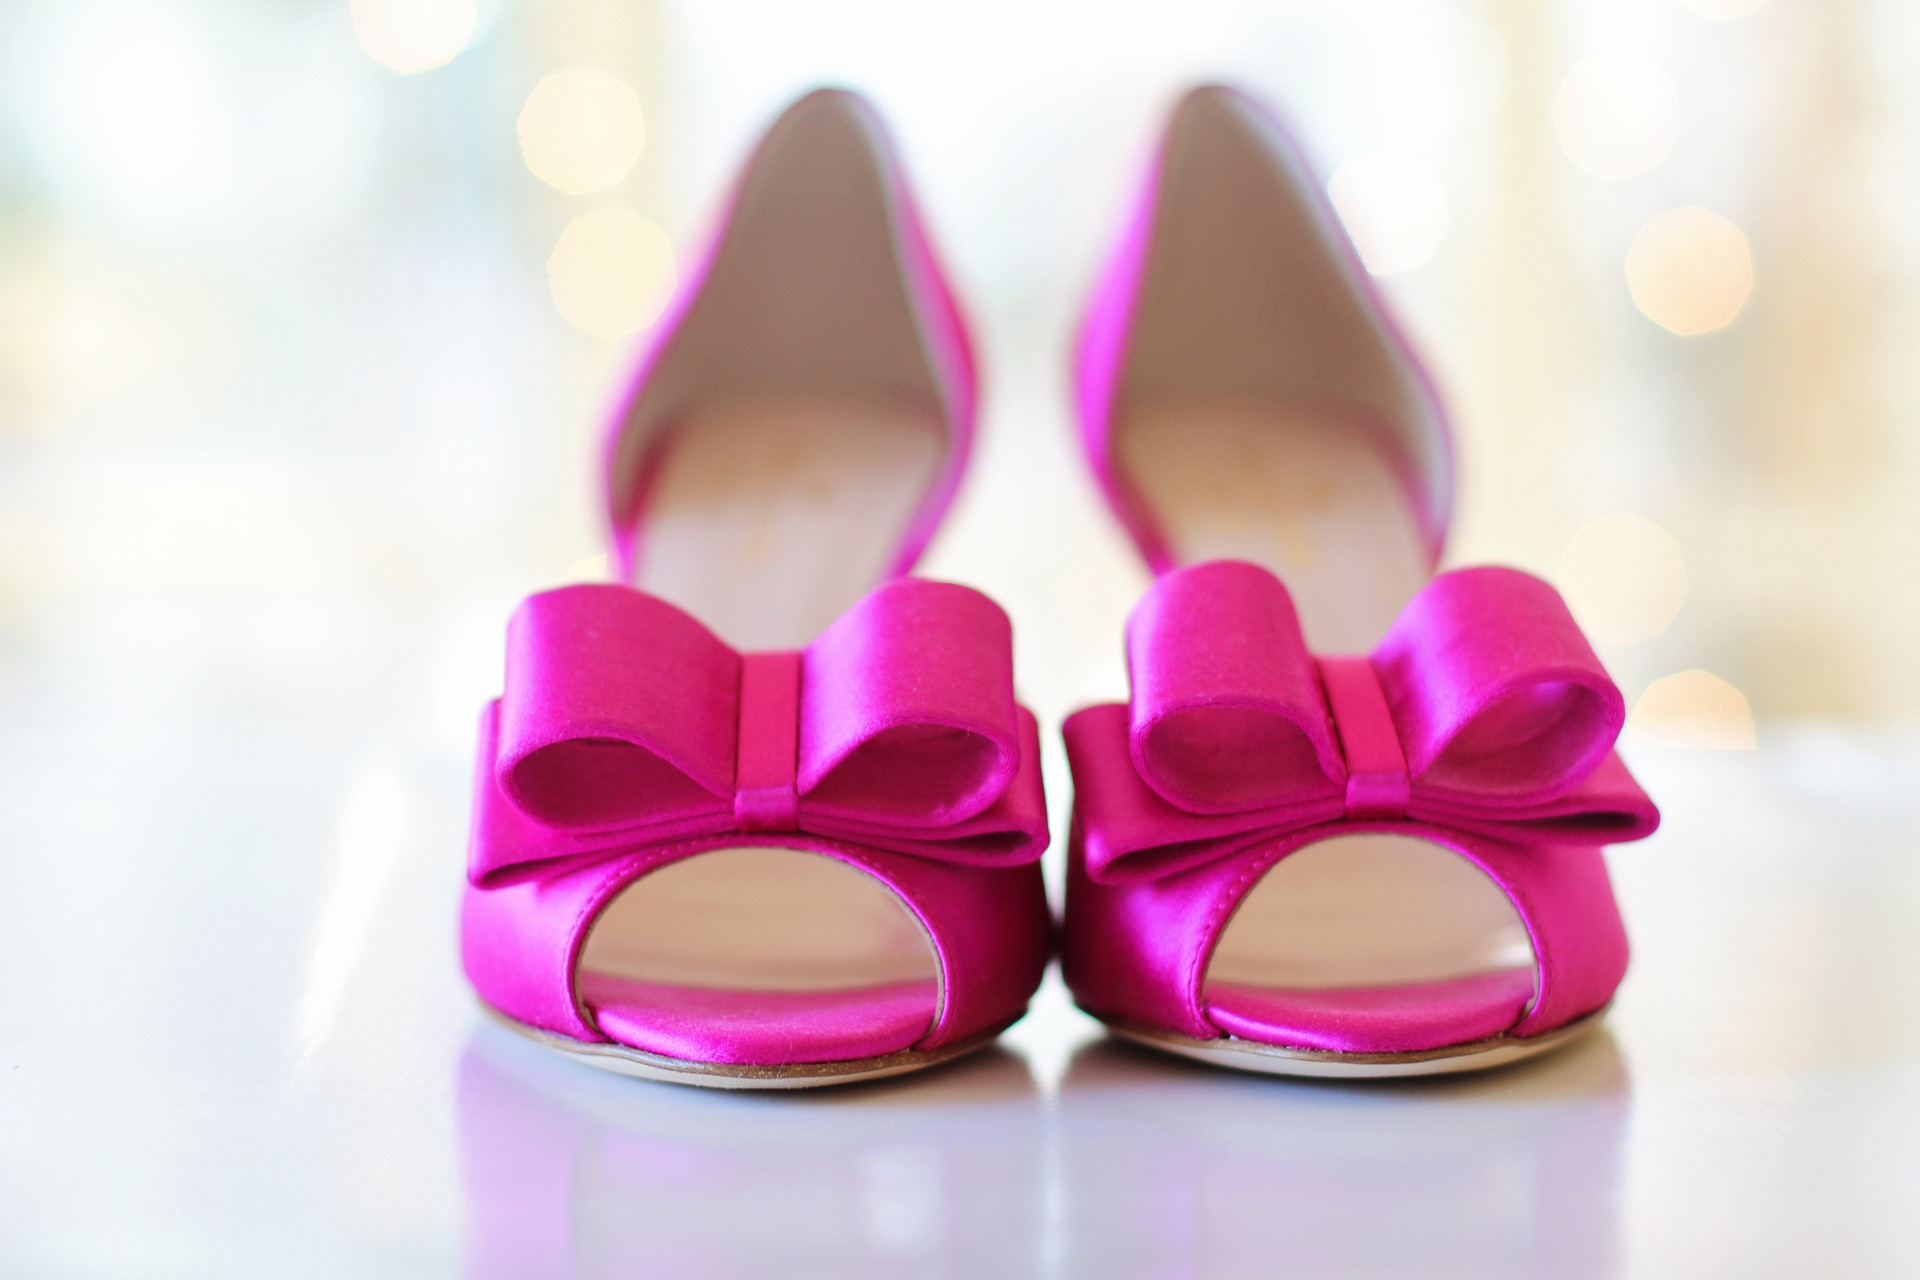 pink-shoes-g81bf86519_1920